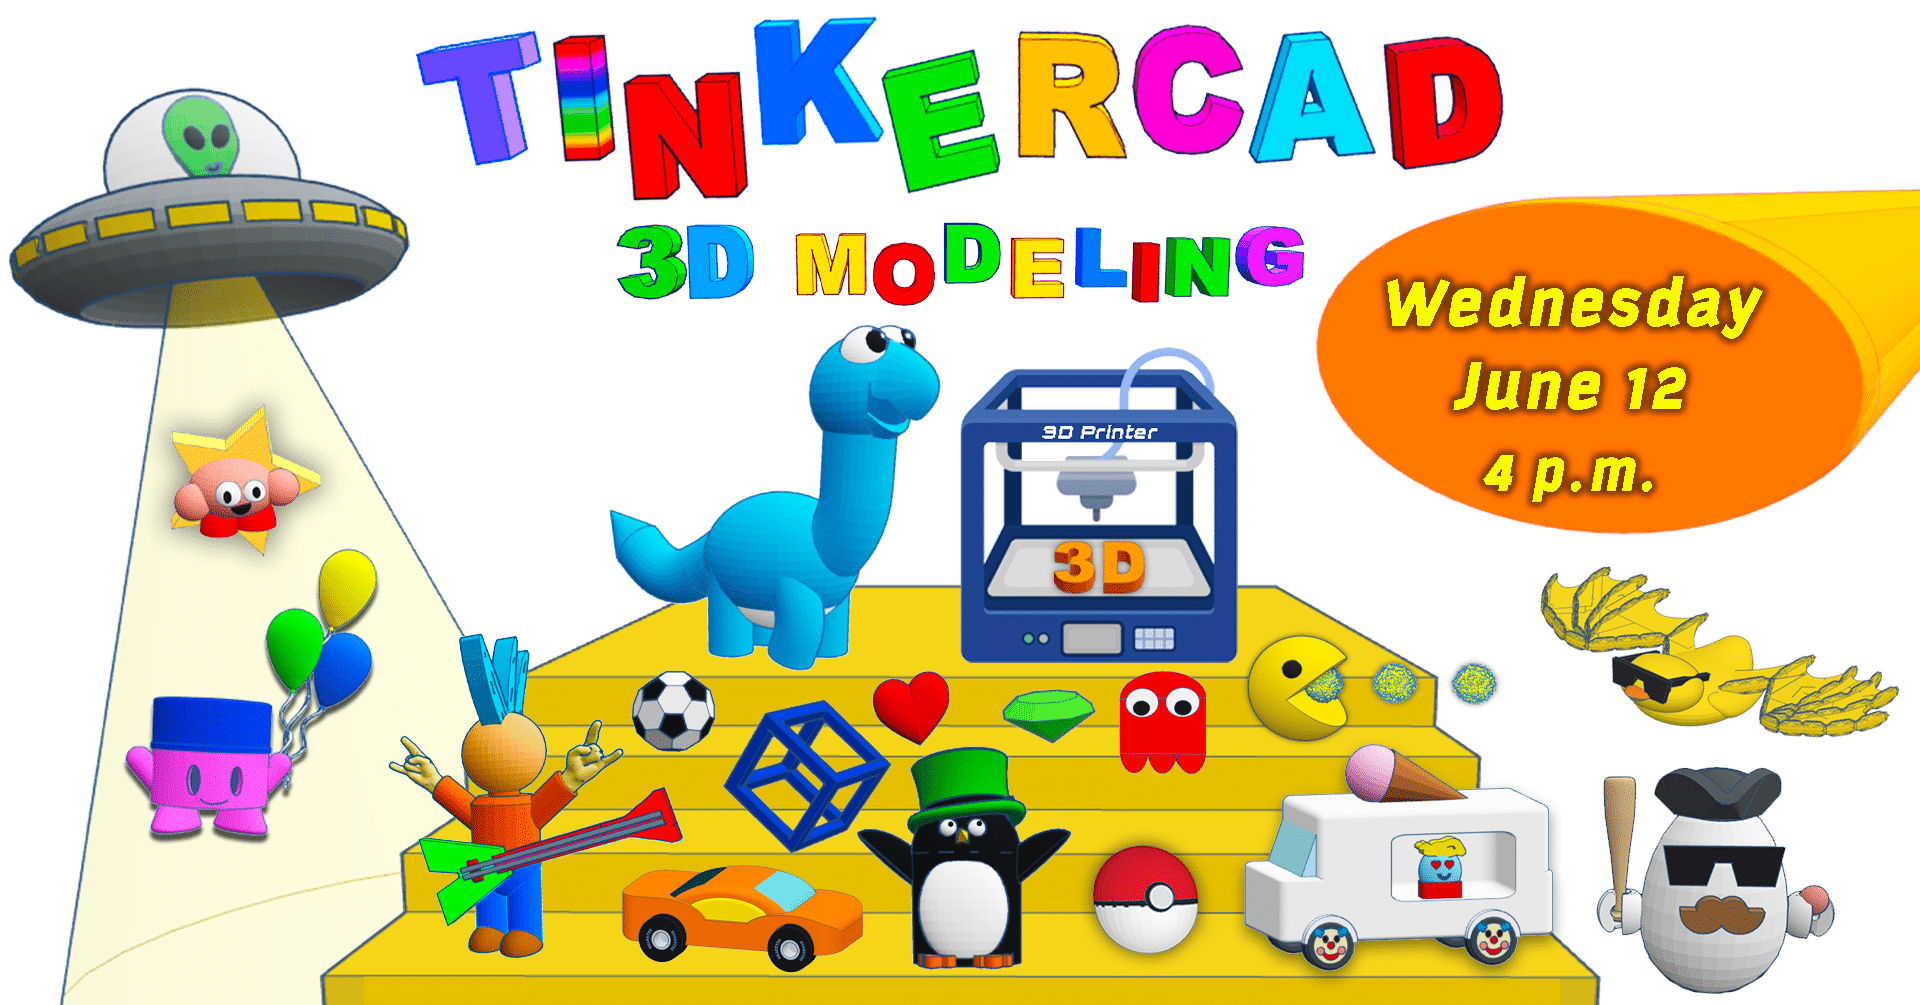 Tinkercad 3D Modeling, Wednesday, June 12, 4 pm